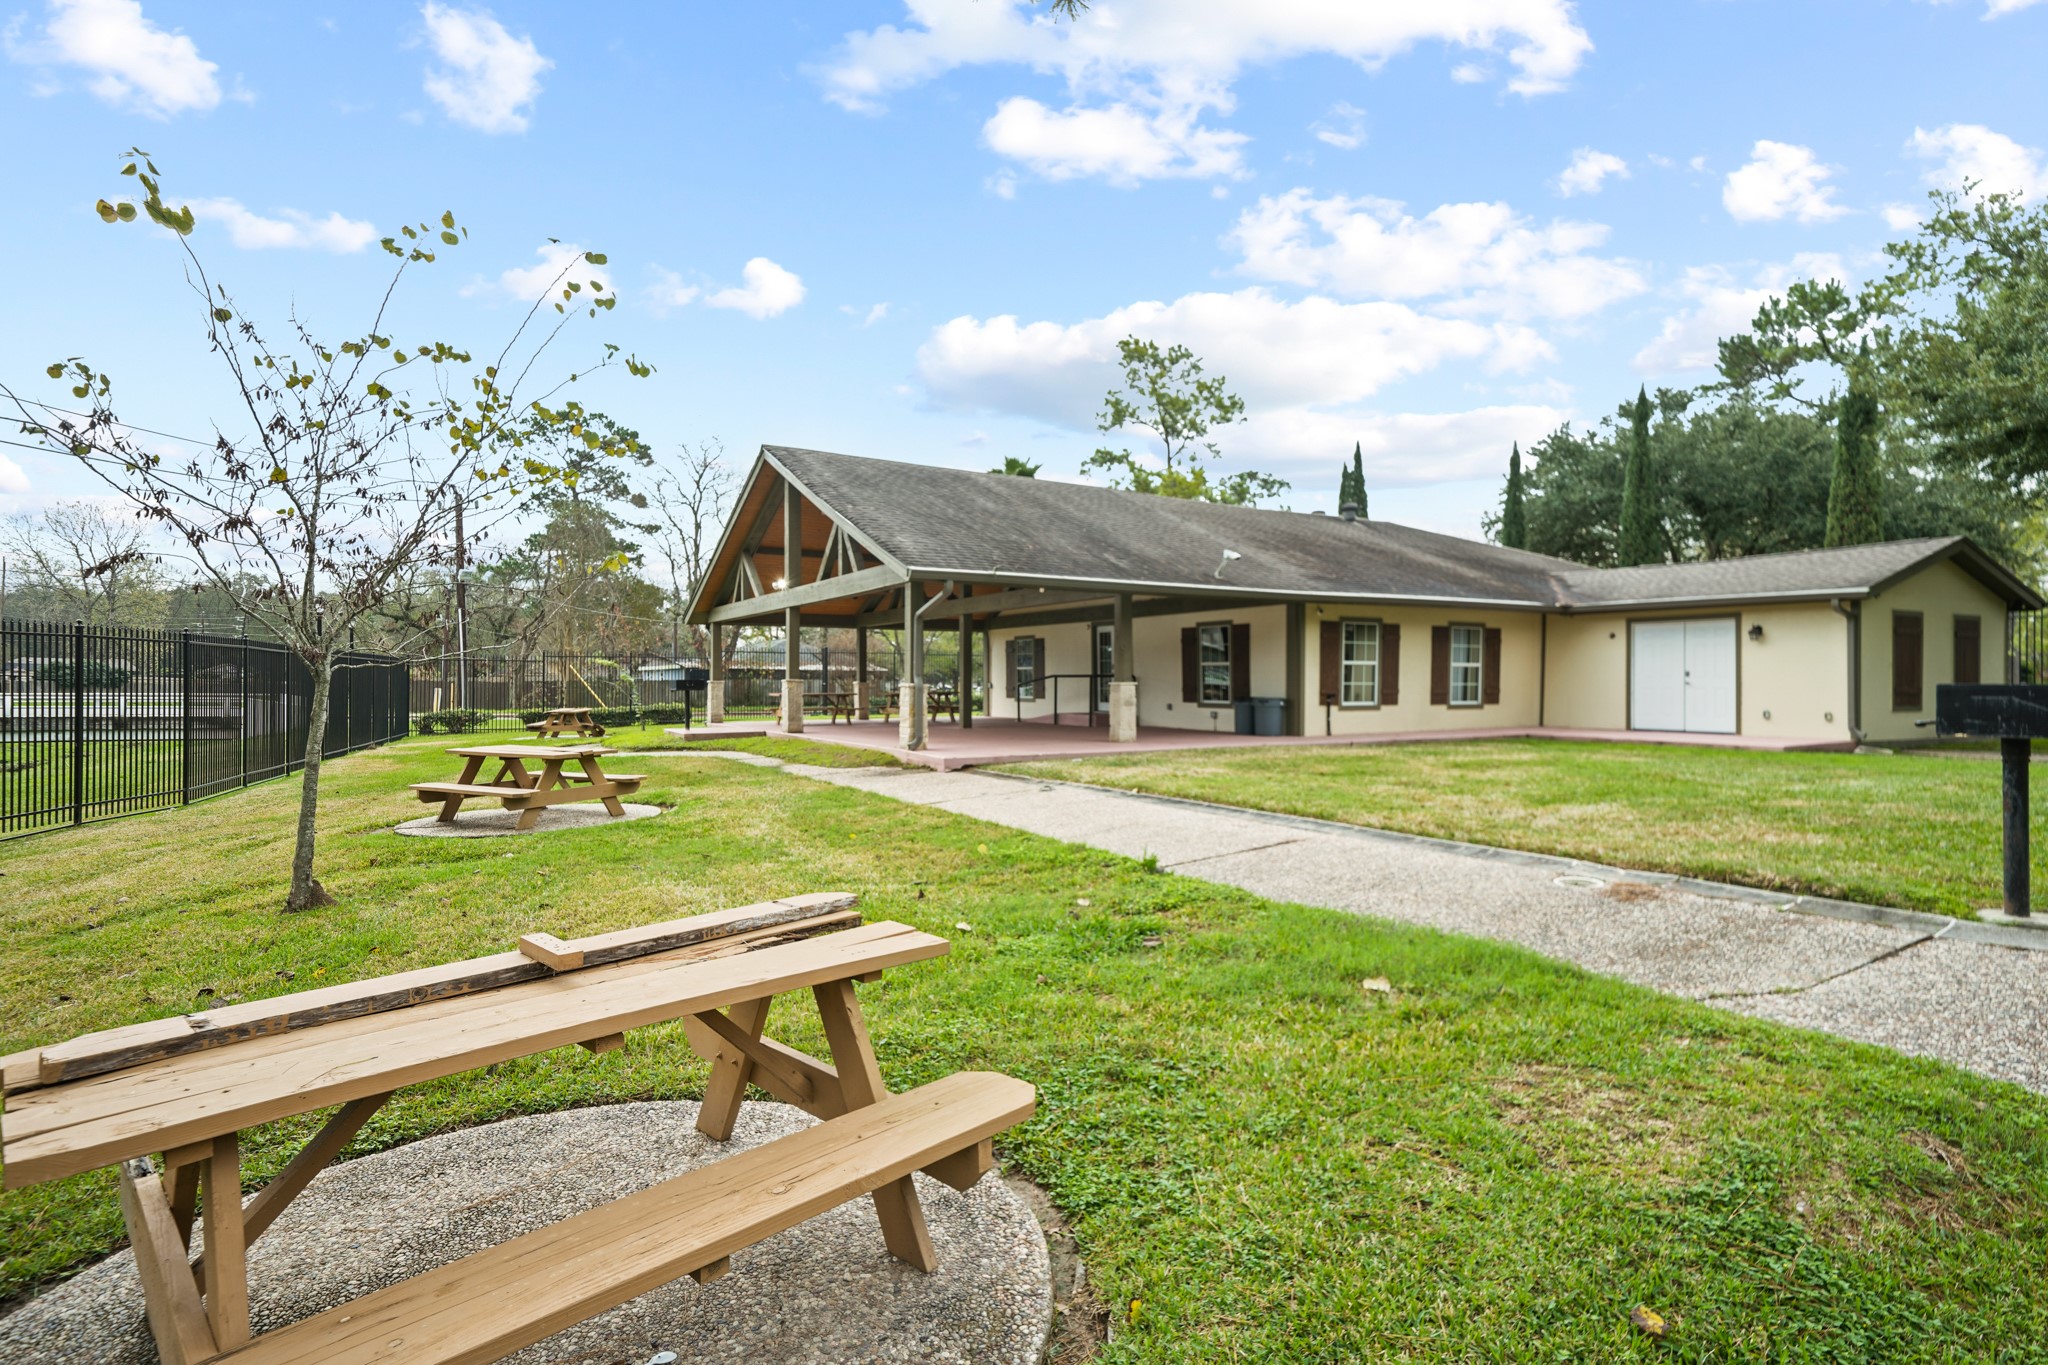 The community center is available to residents for large gatherings like family reunions, large birthday parties, and more.